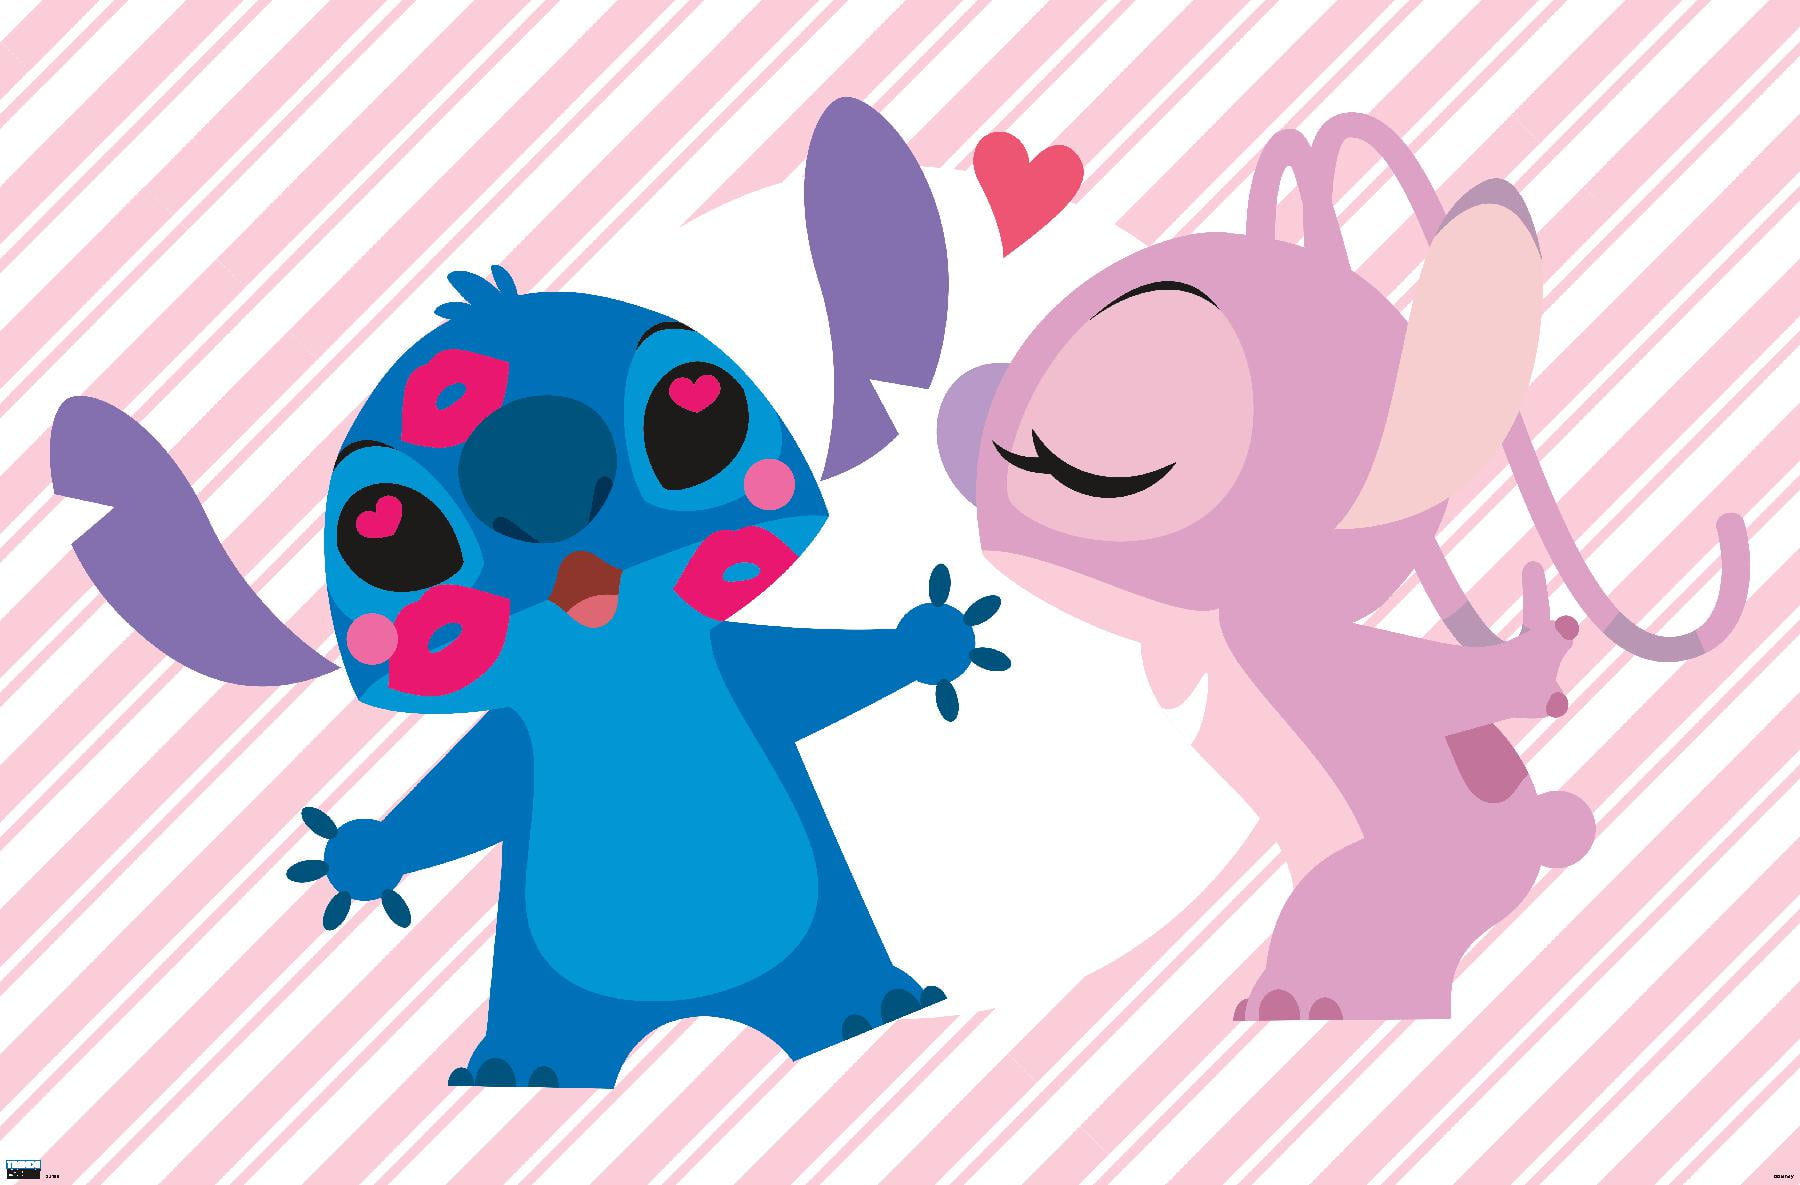 Stitch and Angel: Love Story That Captivated Disney Fans插图4